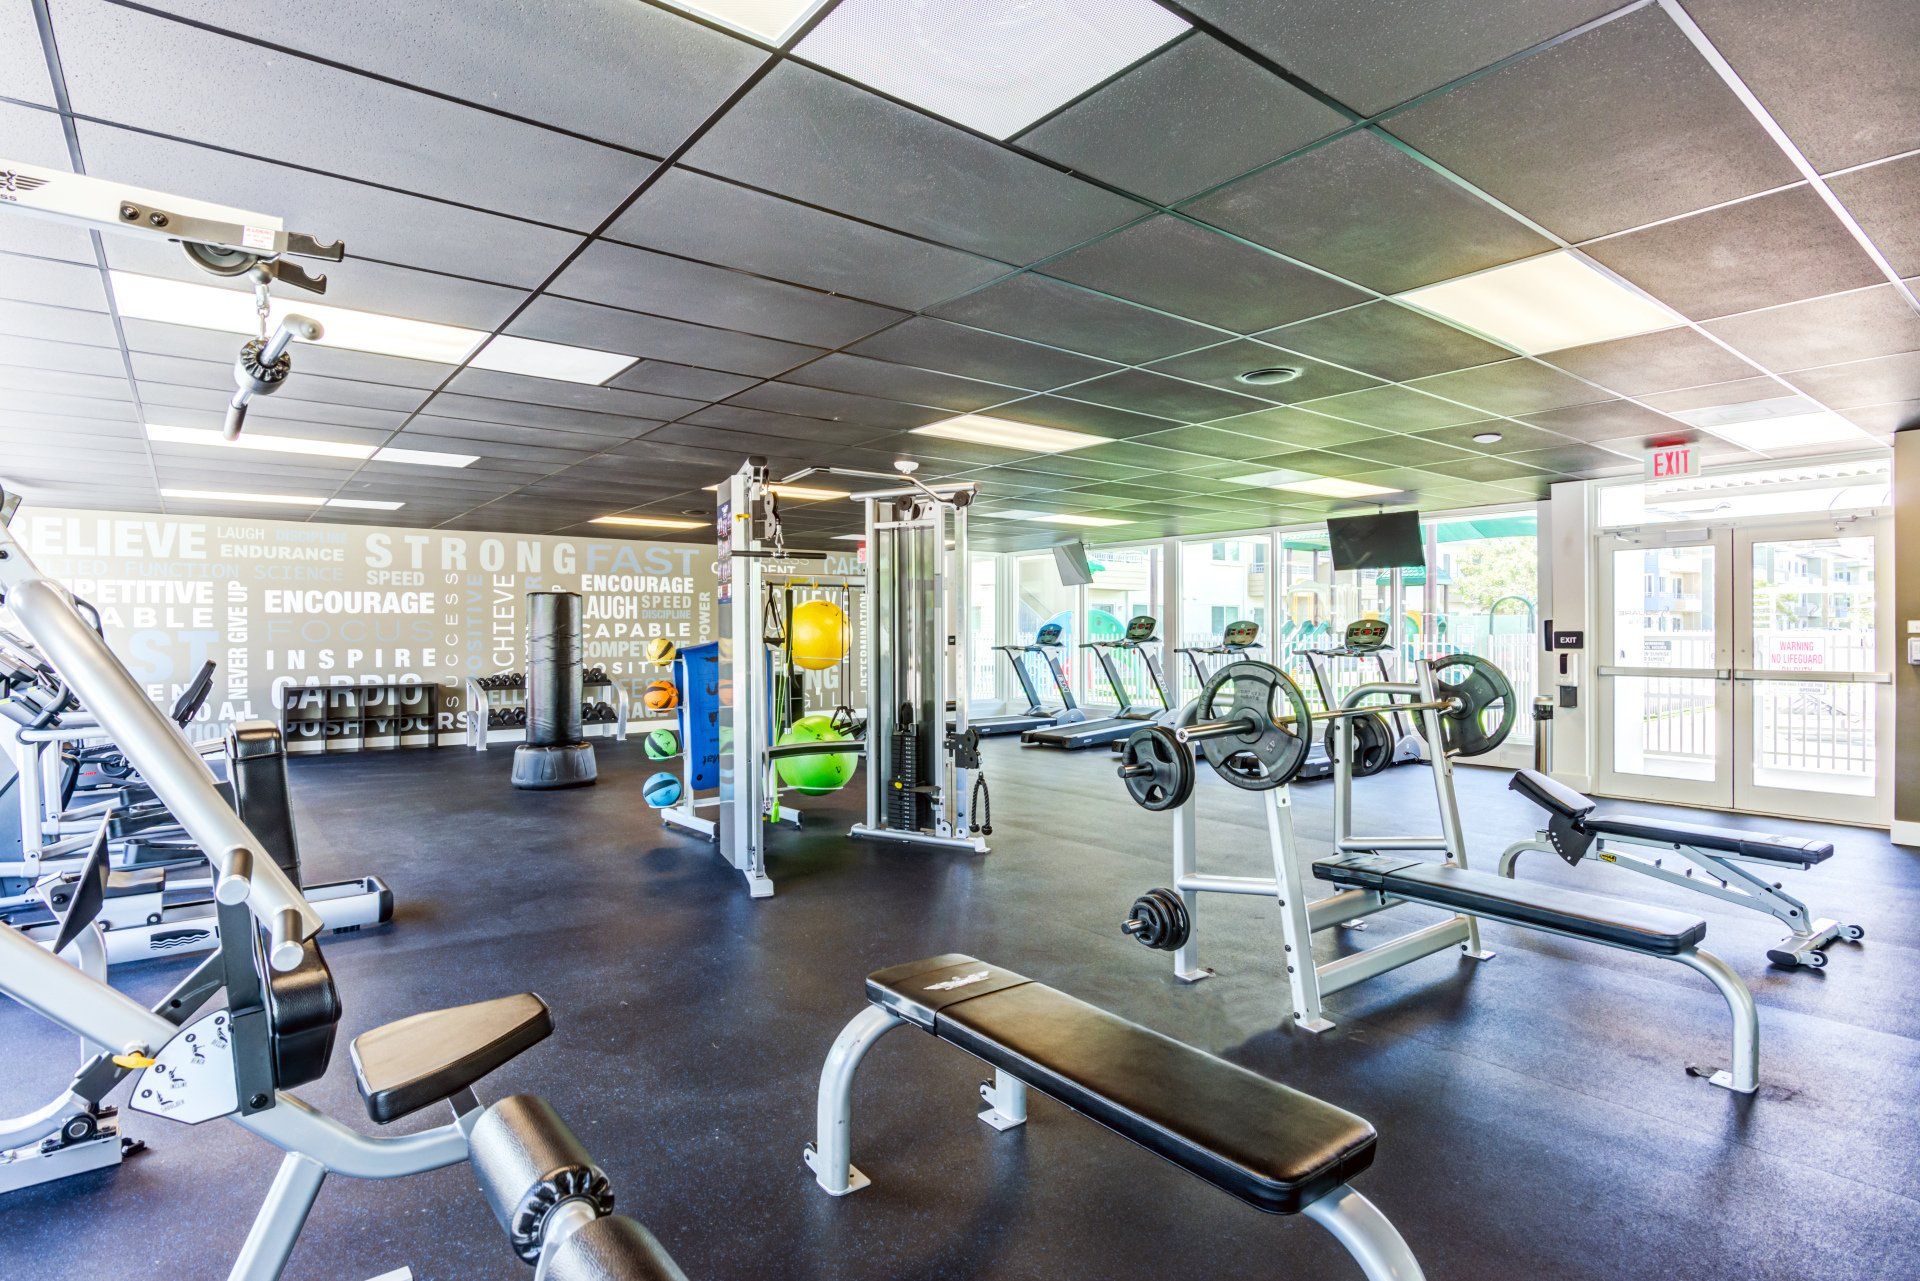 Fitness center at Sophia Square Apartments in Homestead, FL.